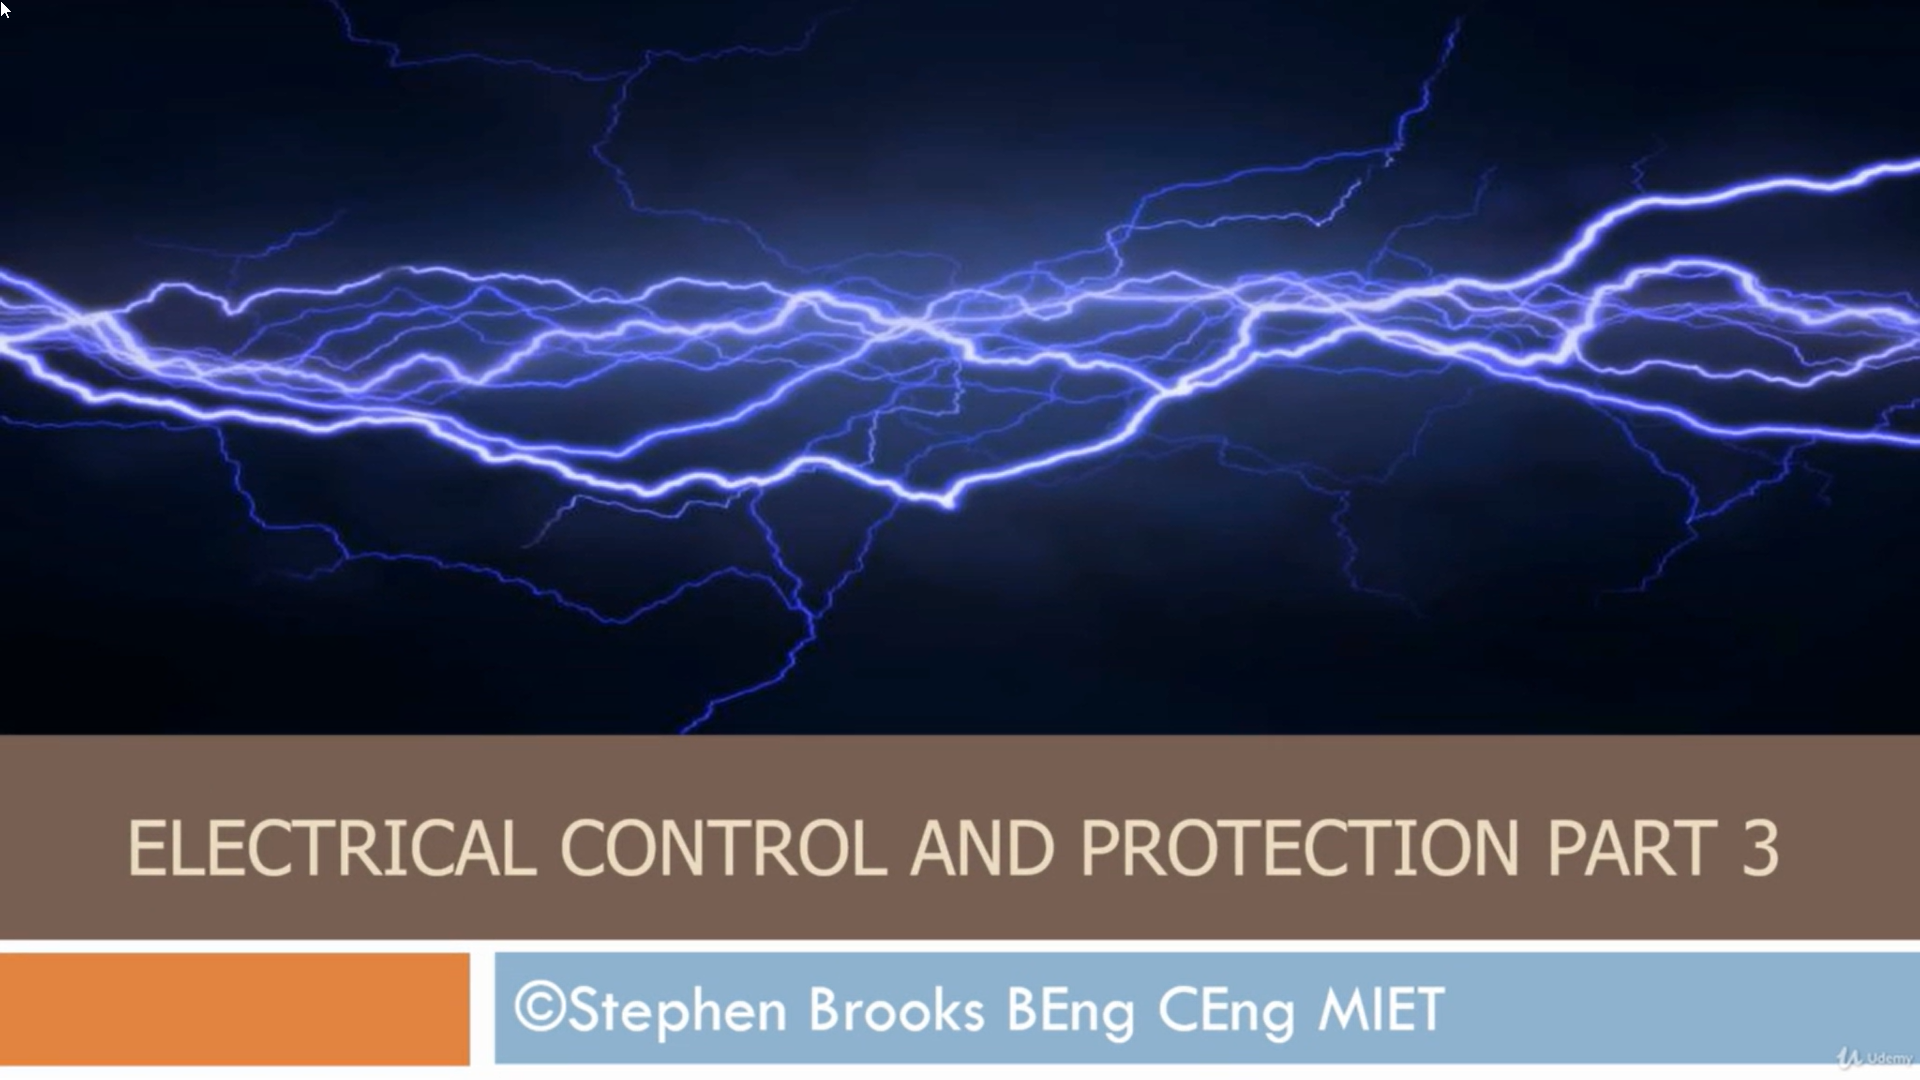 Electrical Control & Protection Systems Part 3